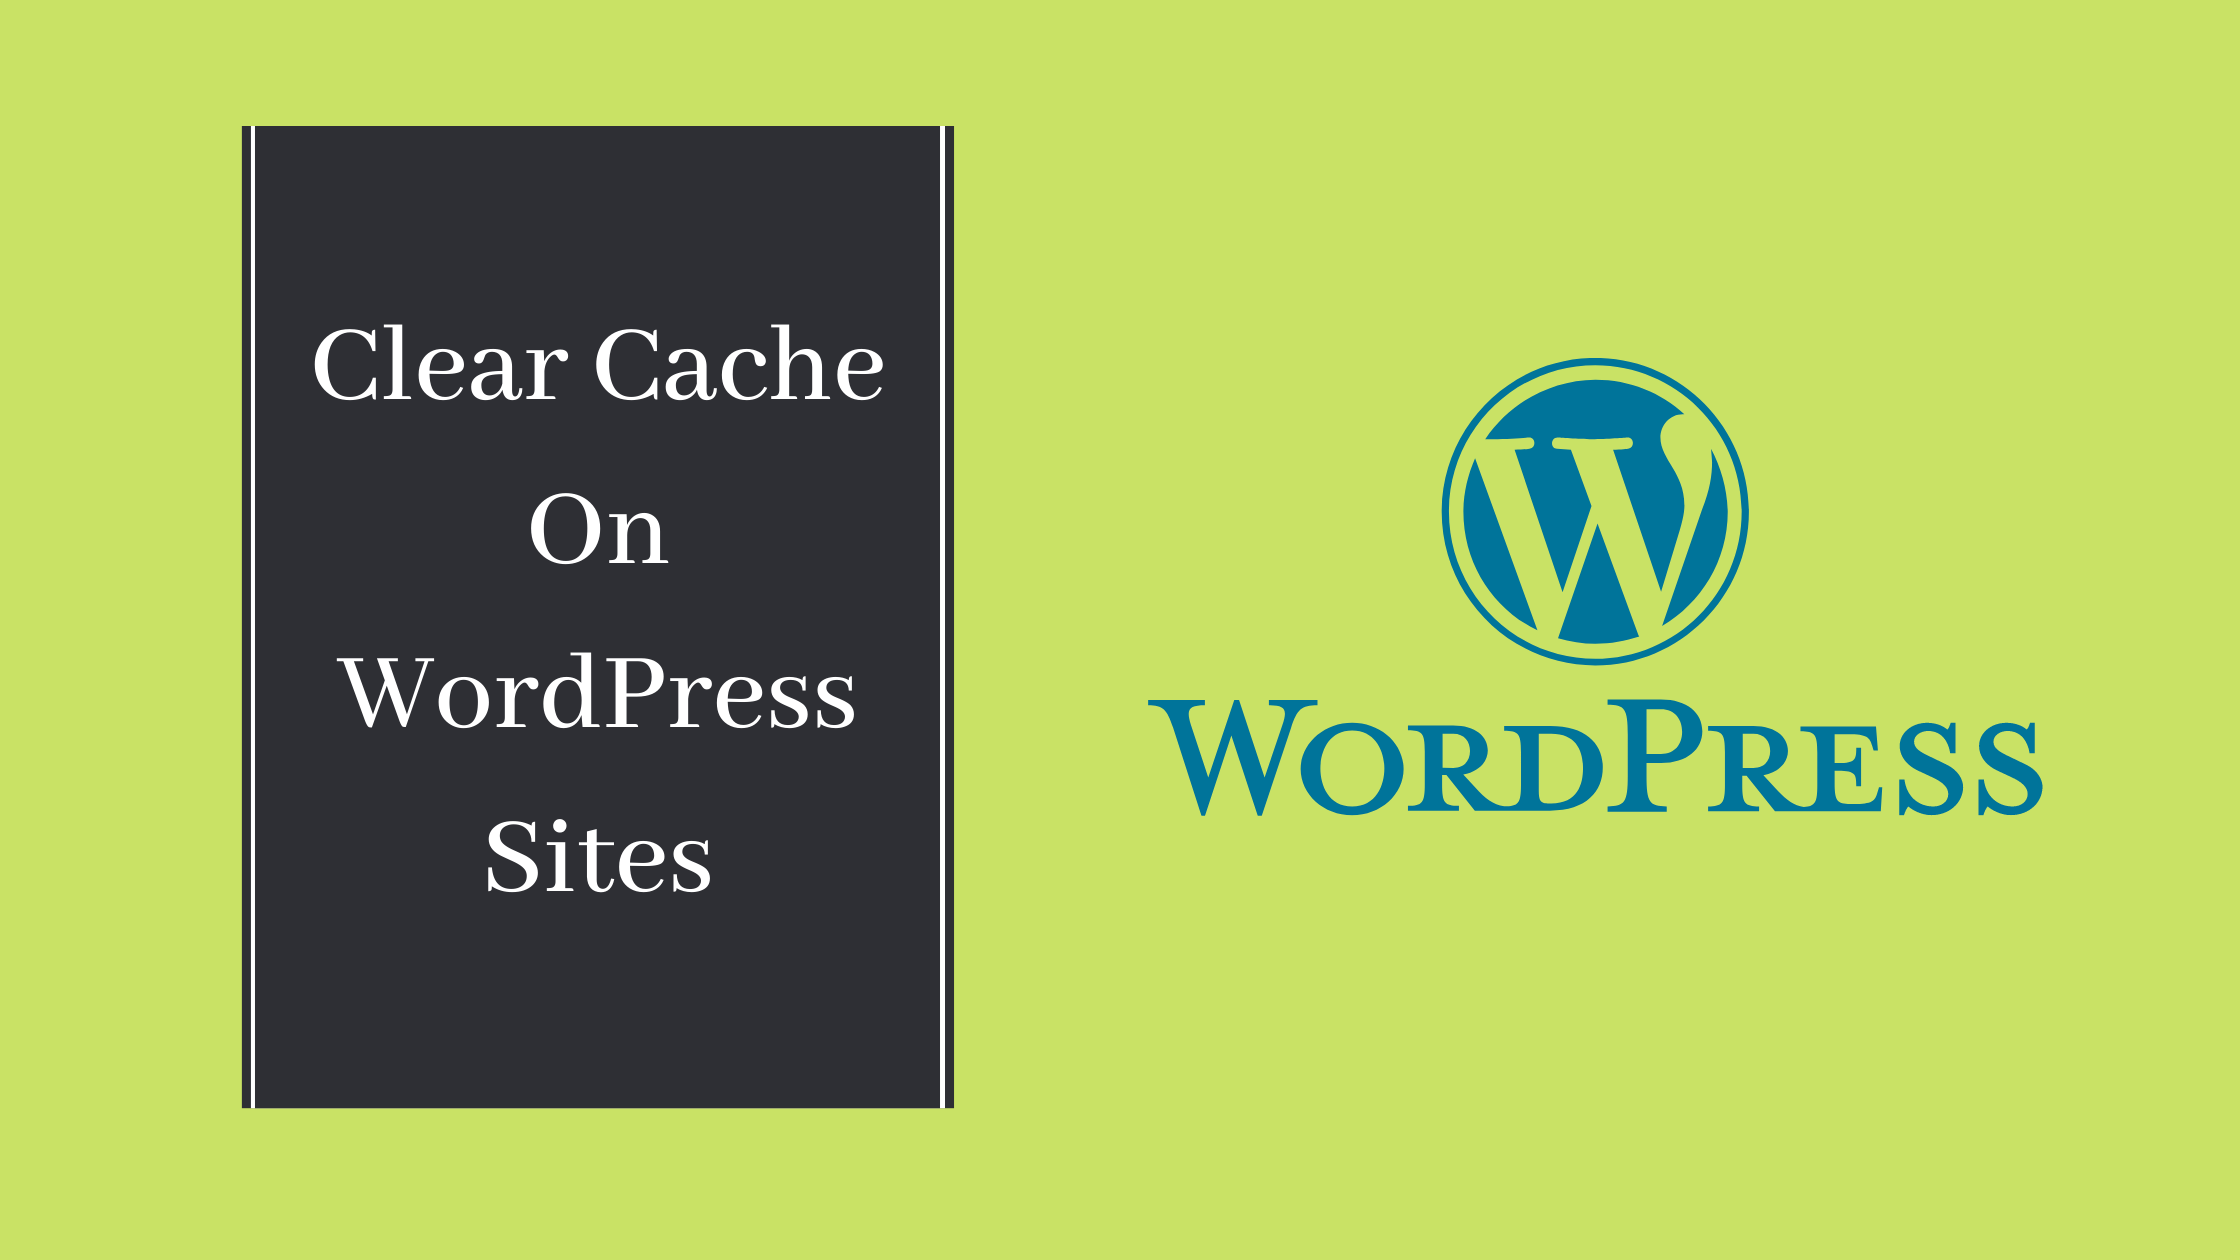 Clear cache on WordPress site